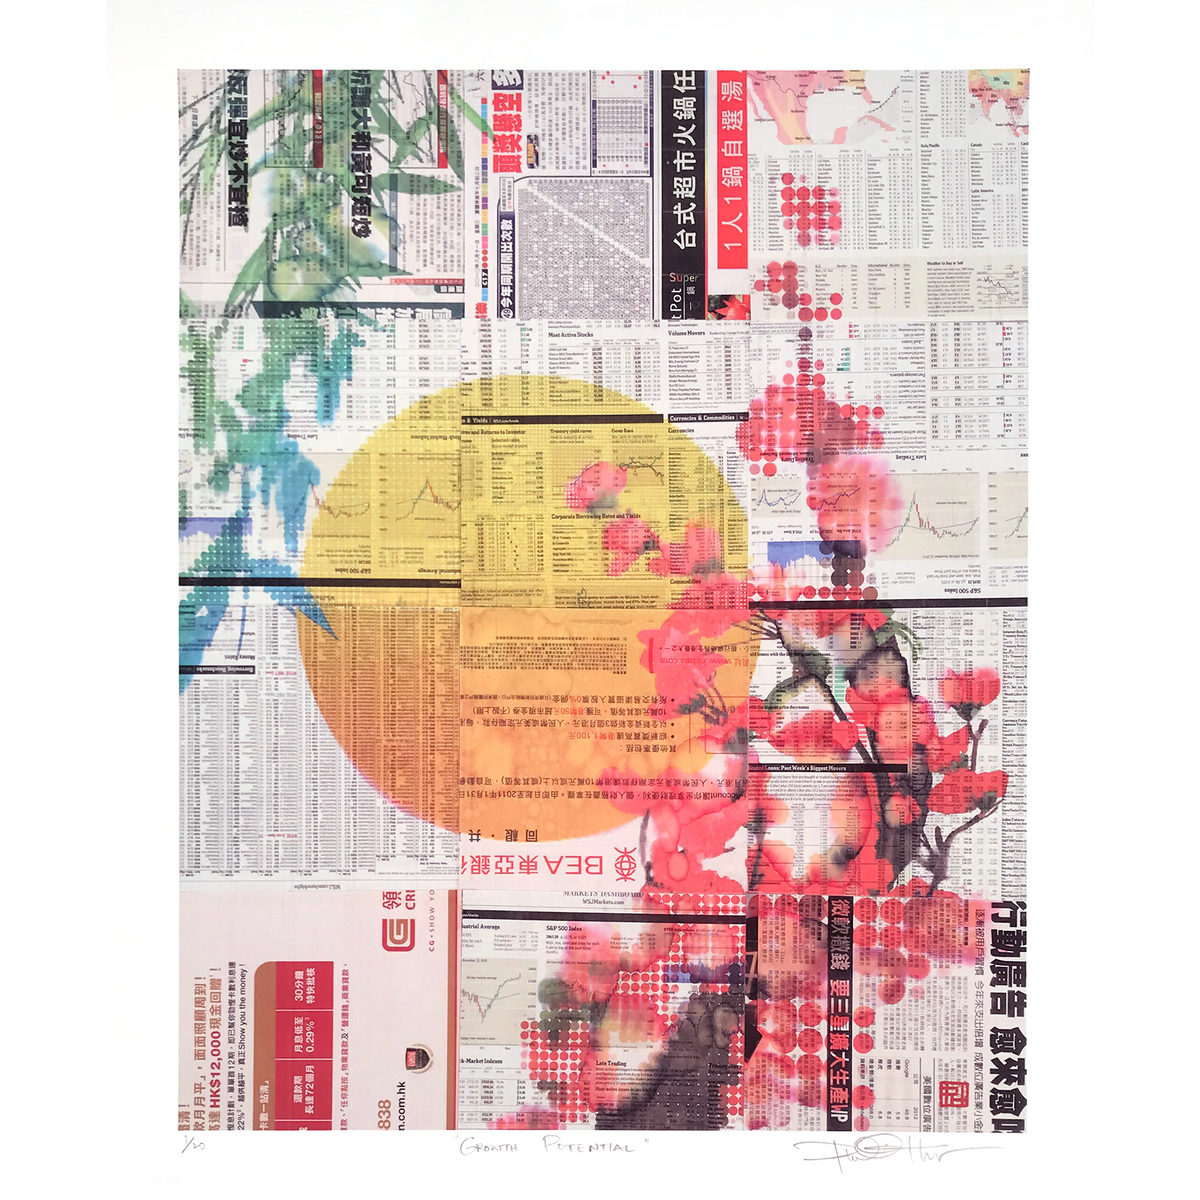 Phillip Hua &quot;Growth Potential&quot; - Archival Print, Limited Edition of 20 - 14 x 17&quot;